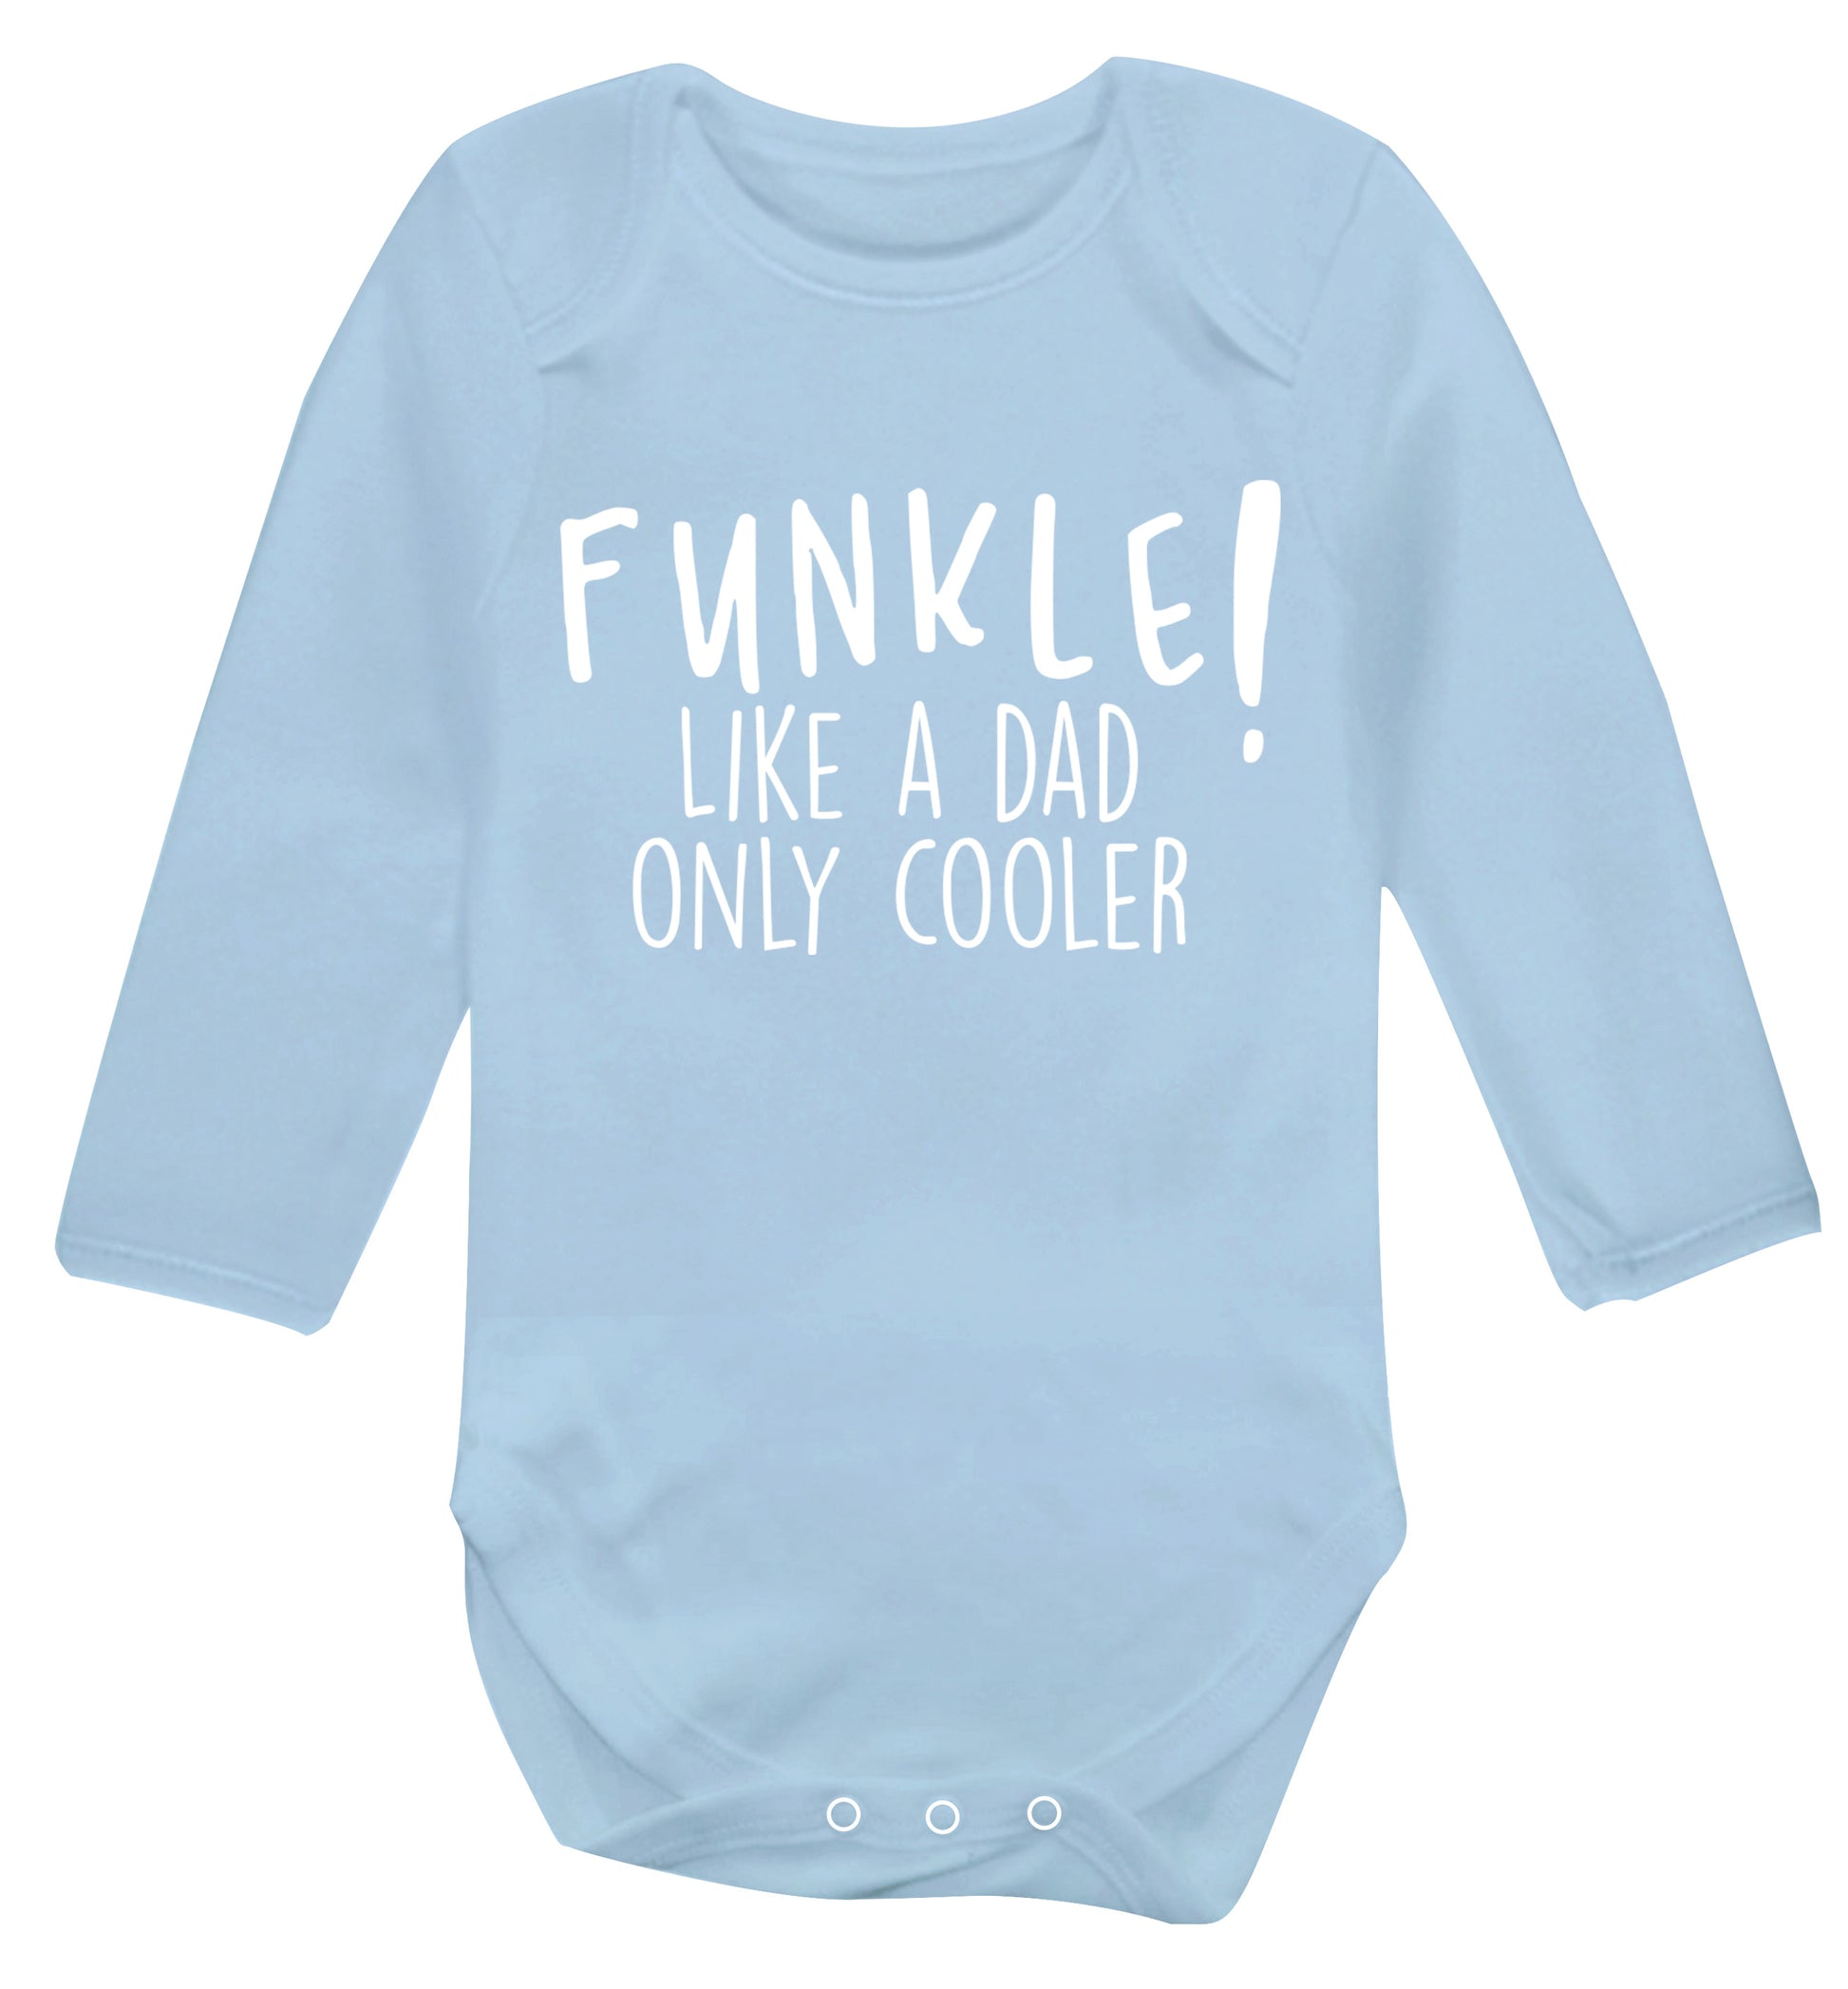 Funkle Like a Dad Only Cooler Baby Vest long sleeved pale blue 6-12 months